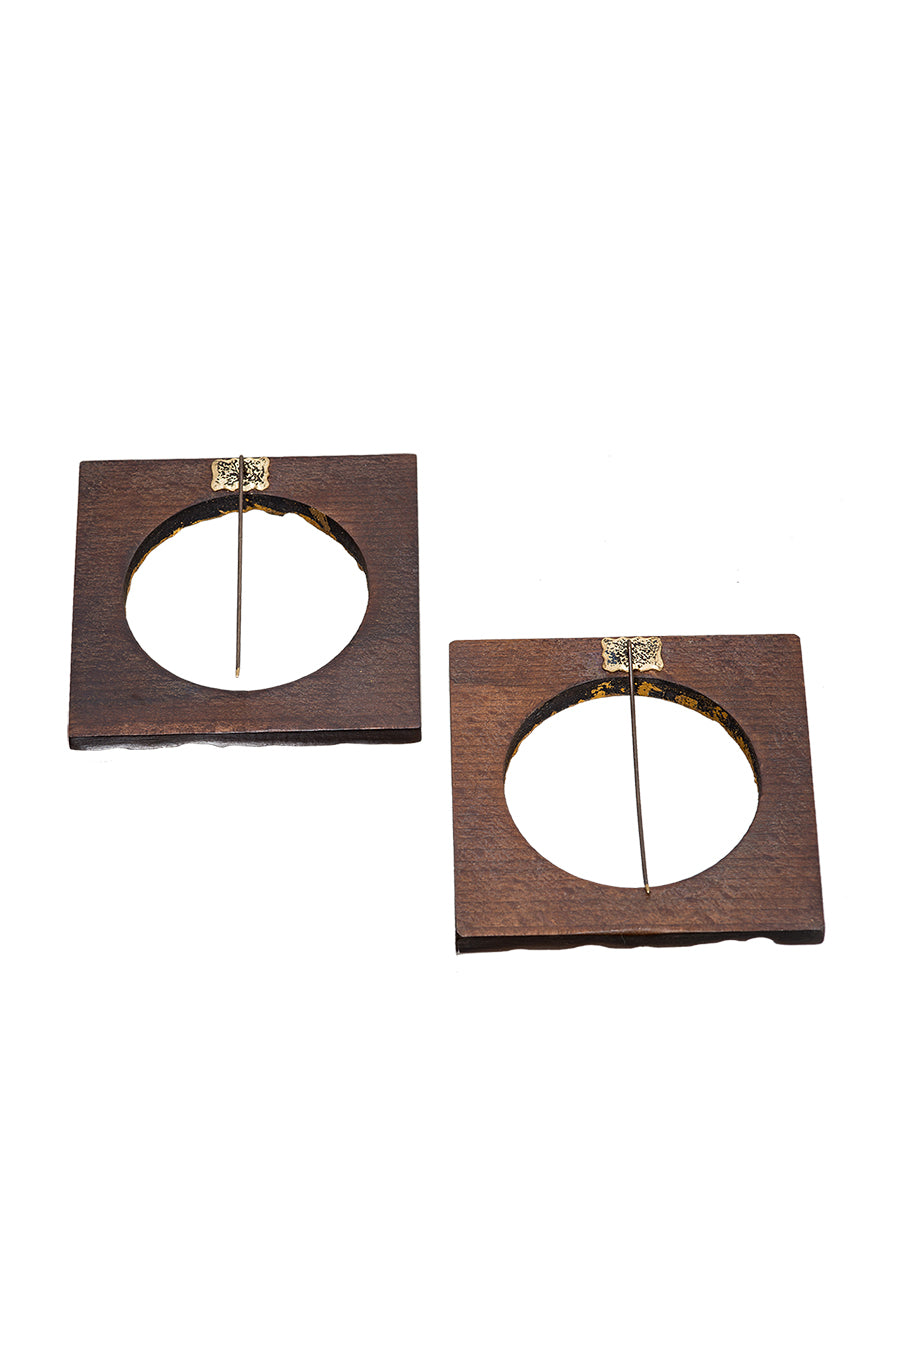 Square-Circle-earrings-wooden